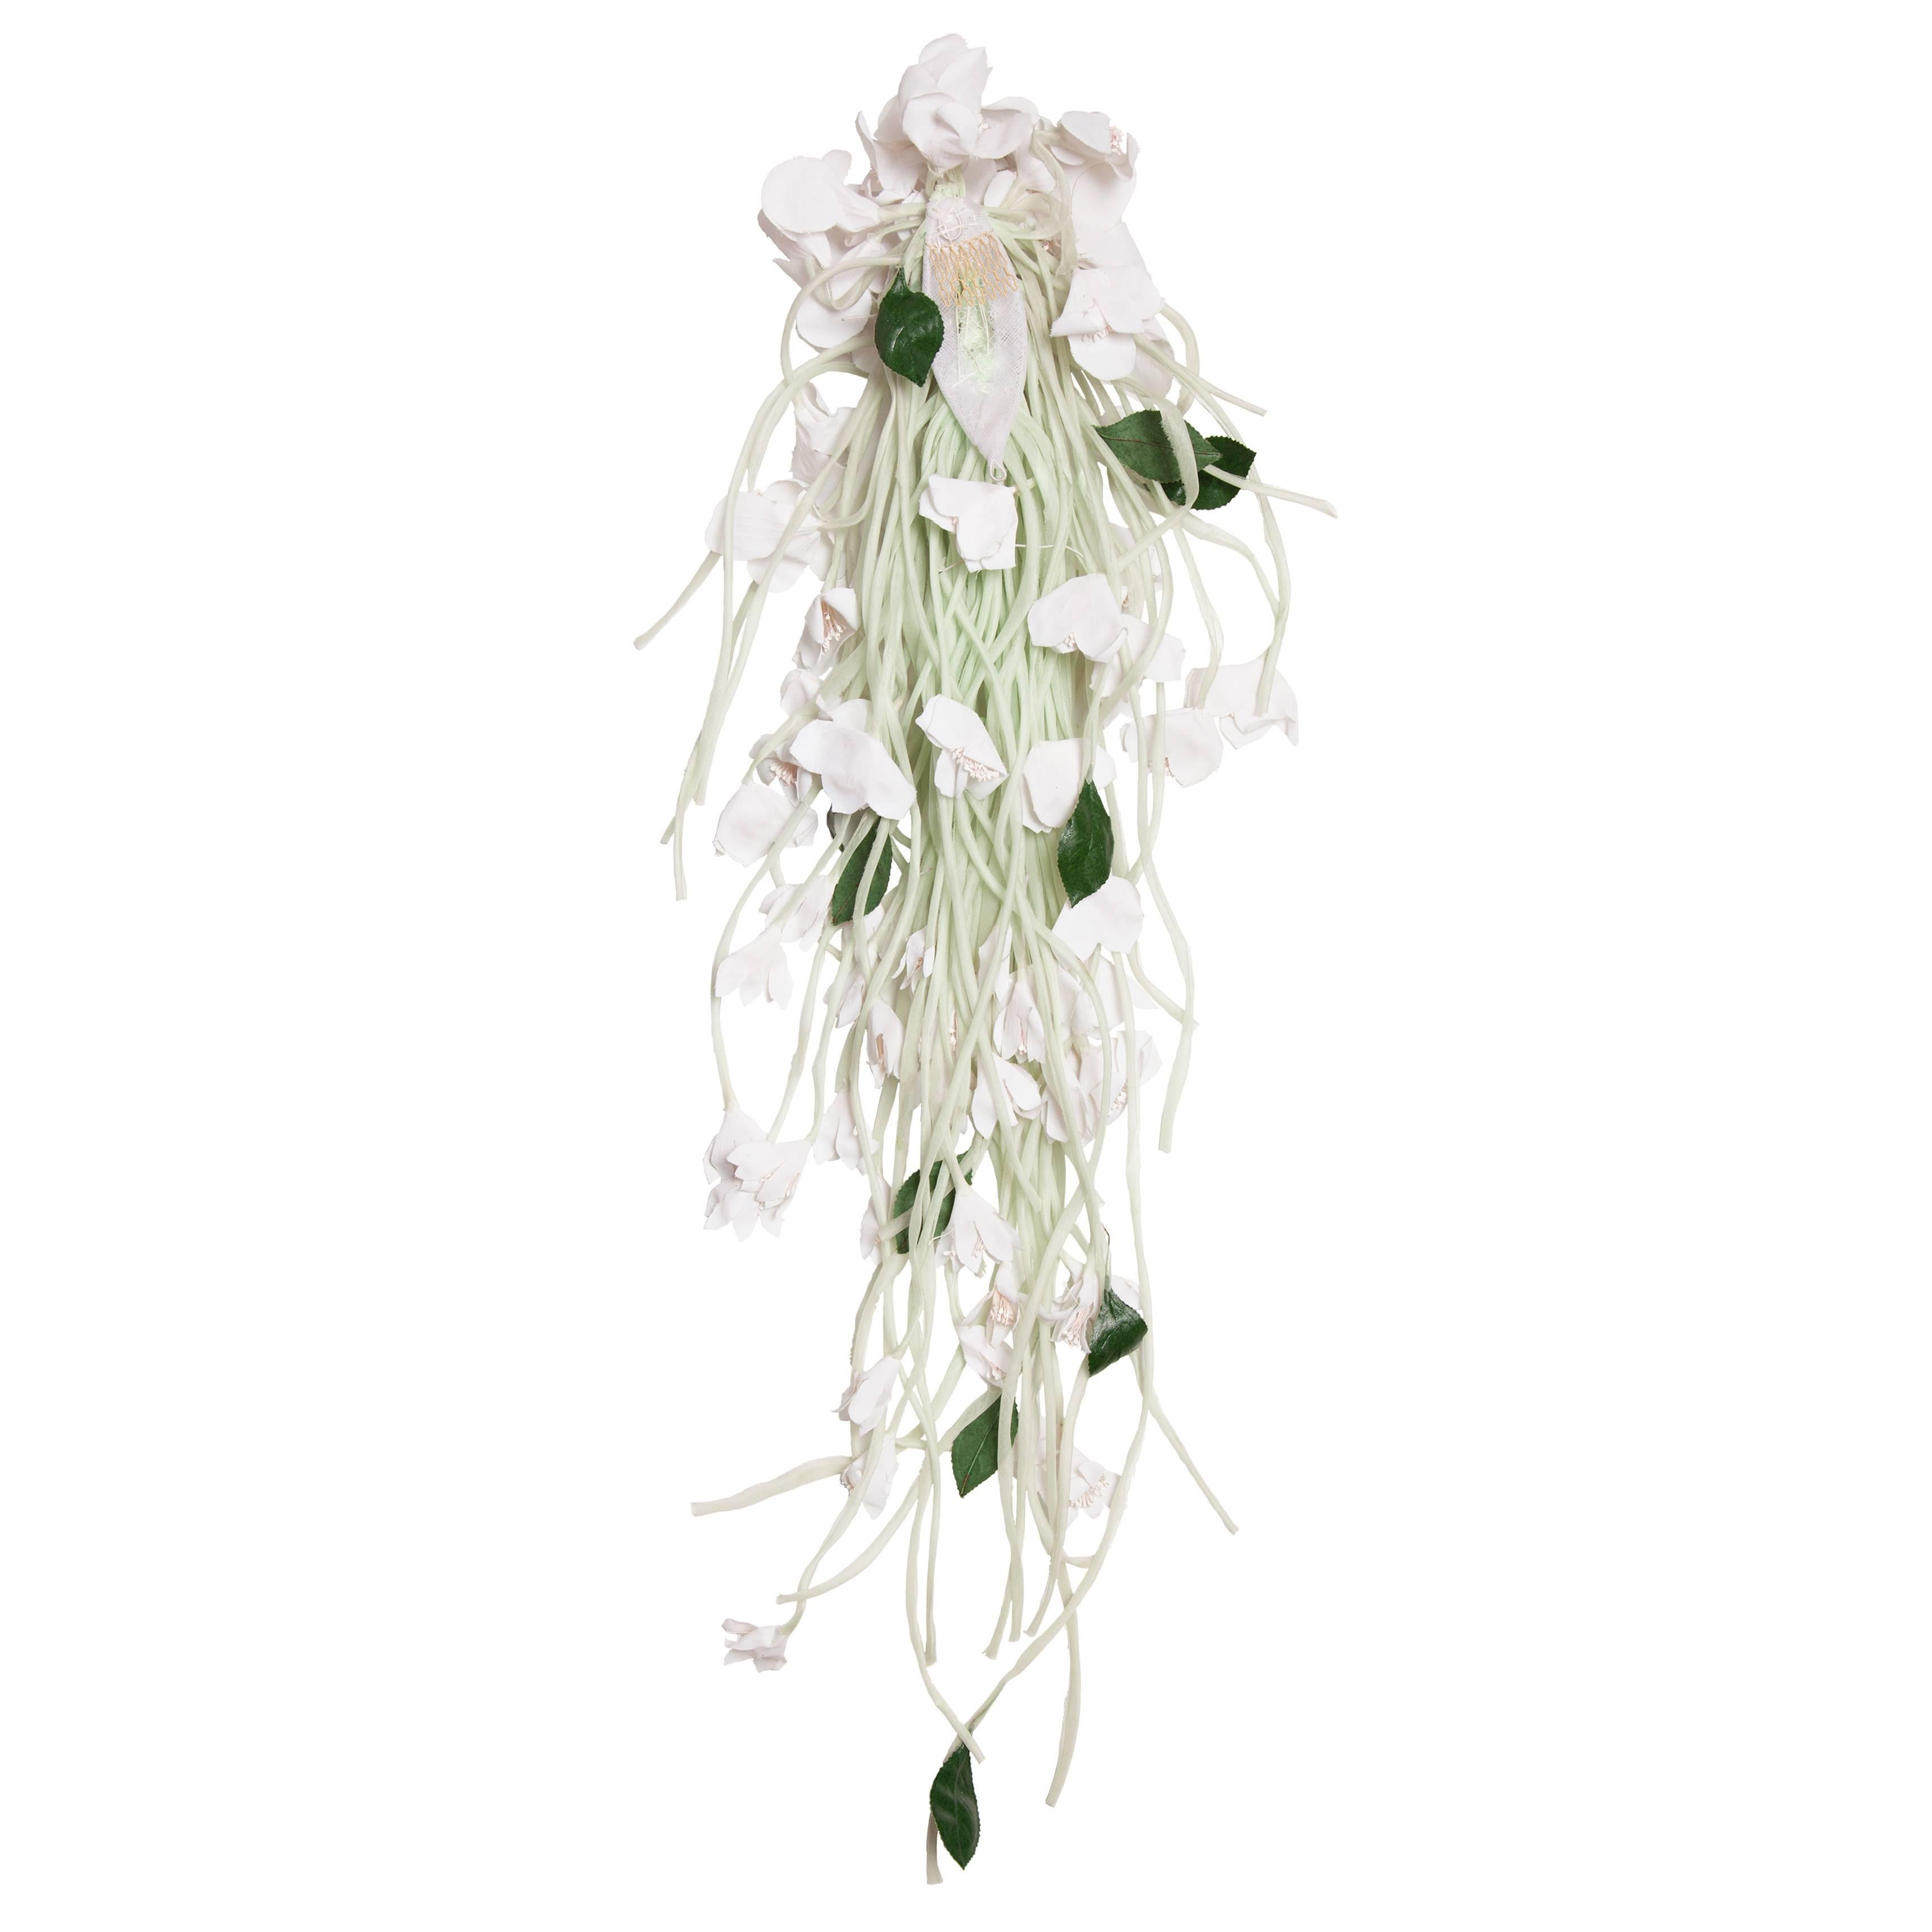 Beautifull Couture hair piece from French atelier from circa 1970's. Shades of light green stems and cream white flowers - Amazing hand crafted bias cut materials gives natural carls. Some of the stems has thin wires -  gives perfect volume and